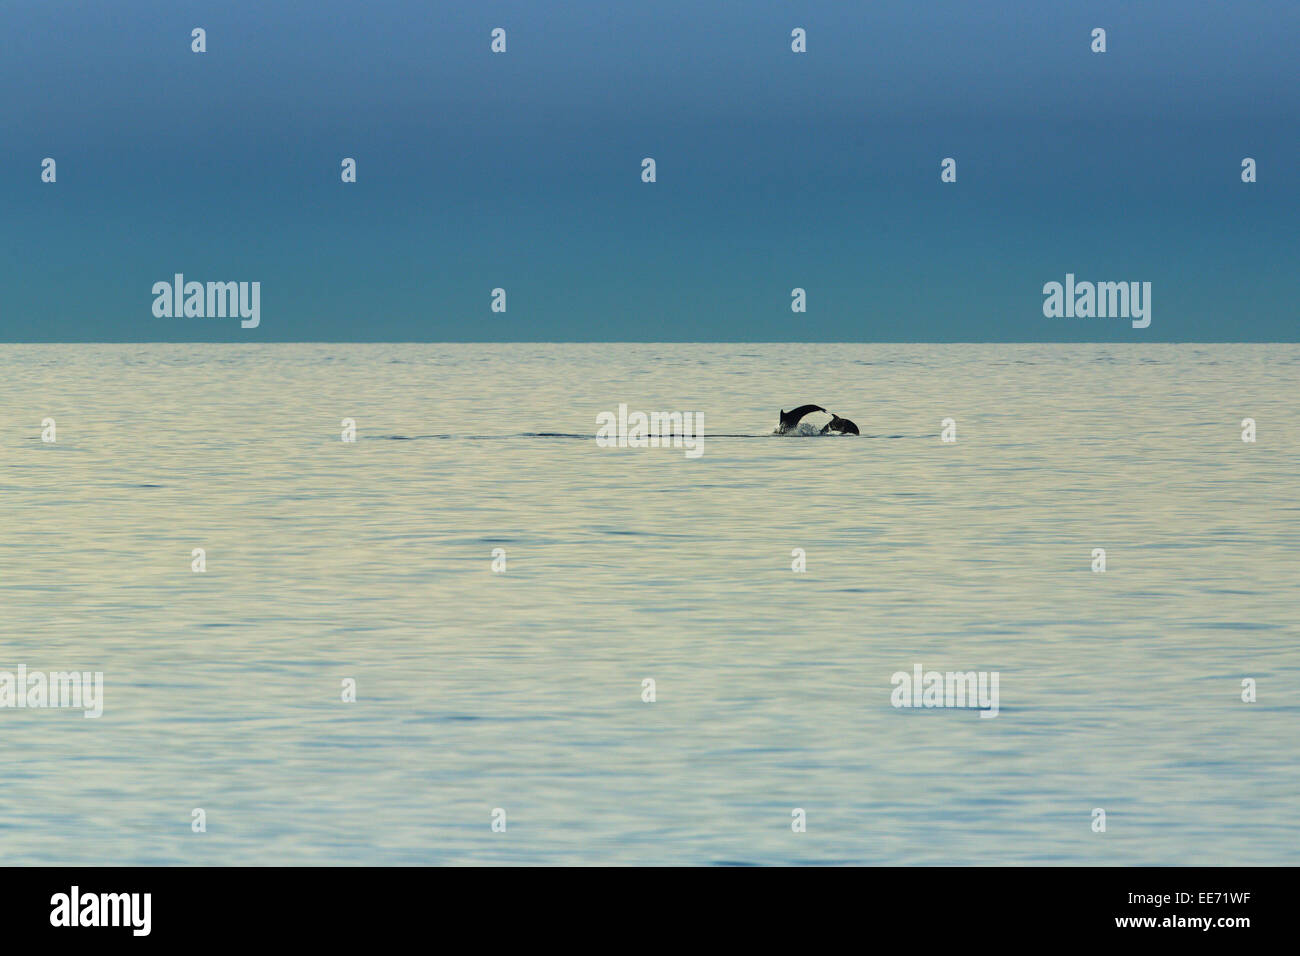 Dolphins leaping out of water, Adriatic Sea, Croatia Stock Photo